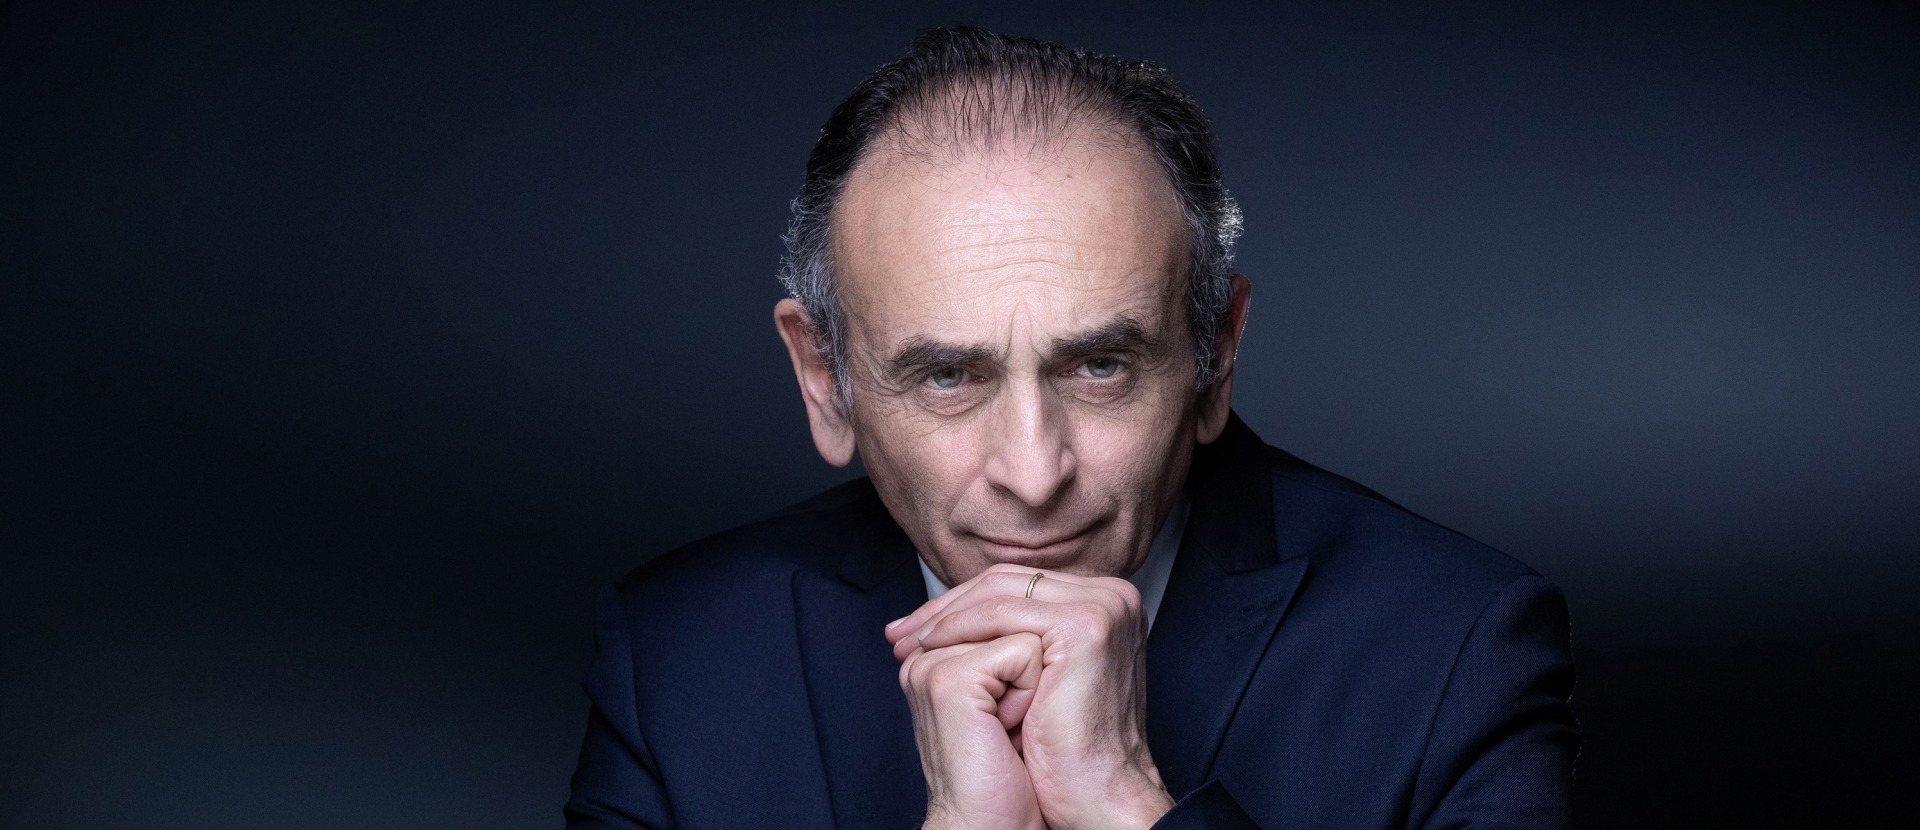 Eric Zemmour Officially Announces Bid for French Presidency